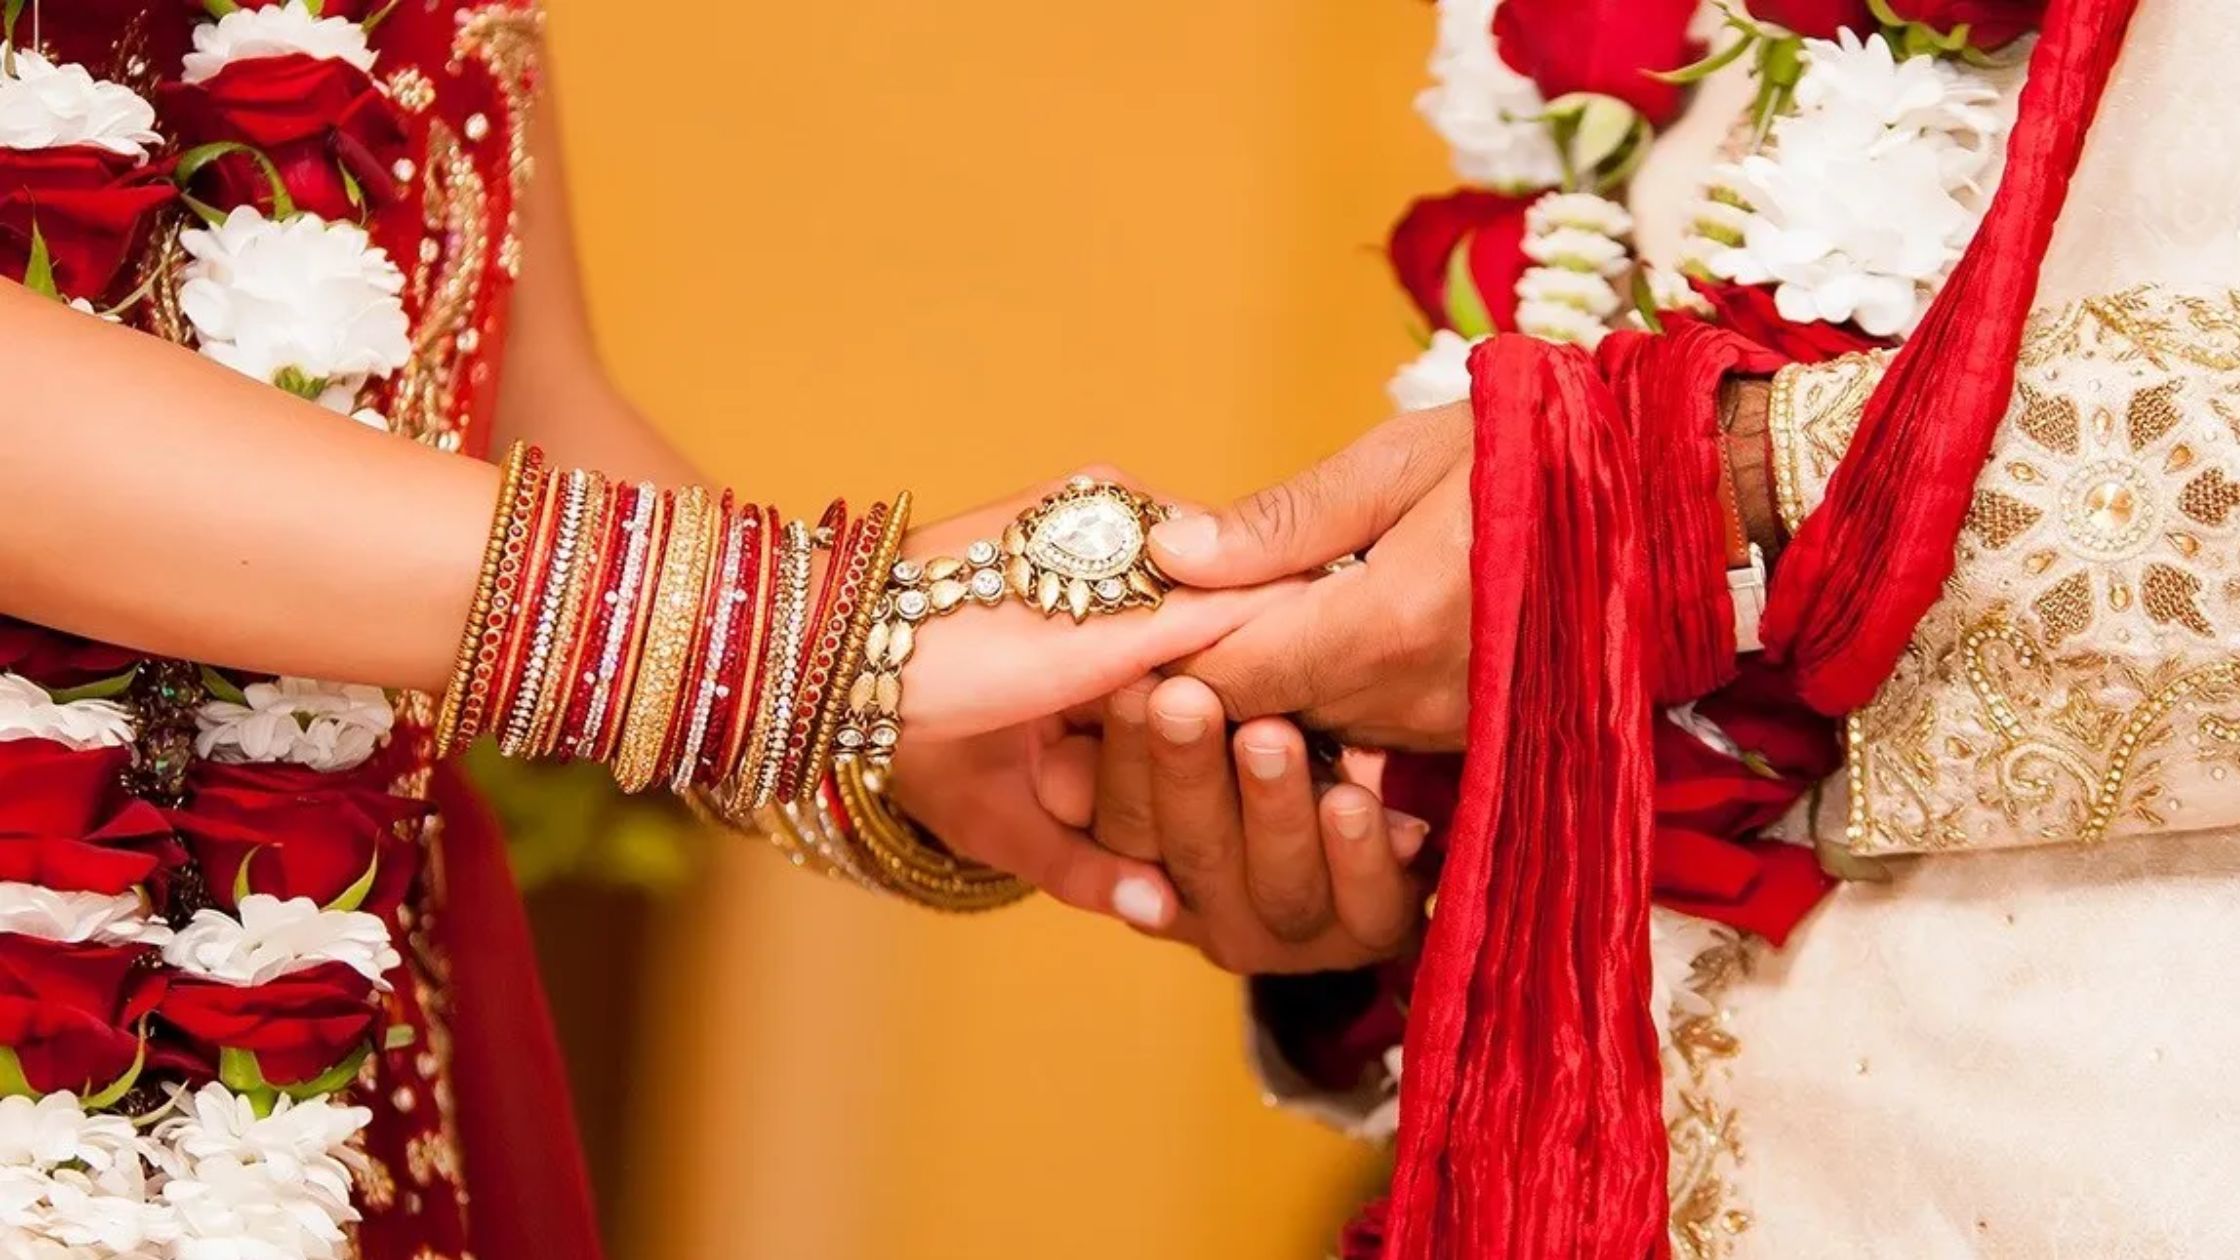 2.5 lakh rupees will be available for inter-caste marriage in Bihar